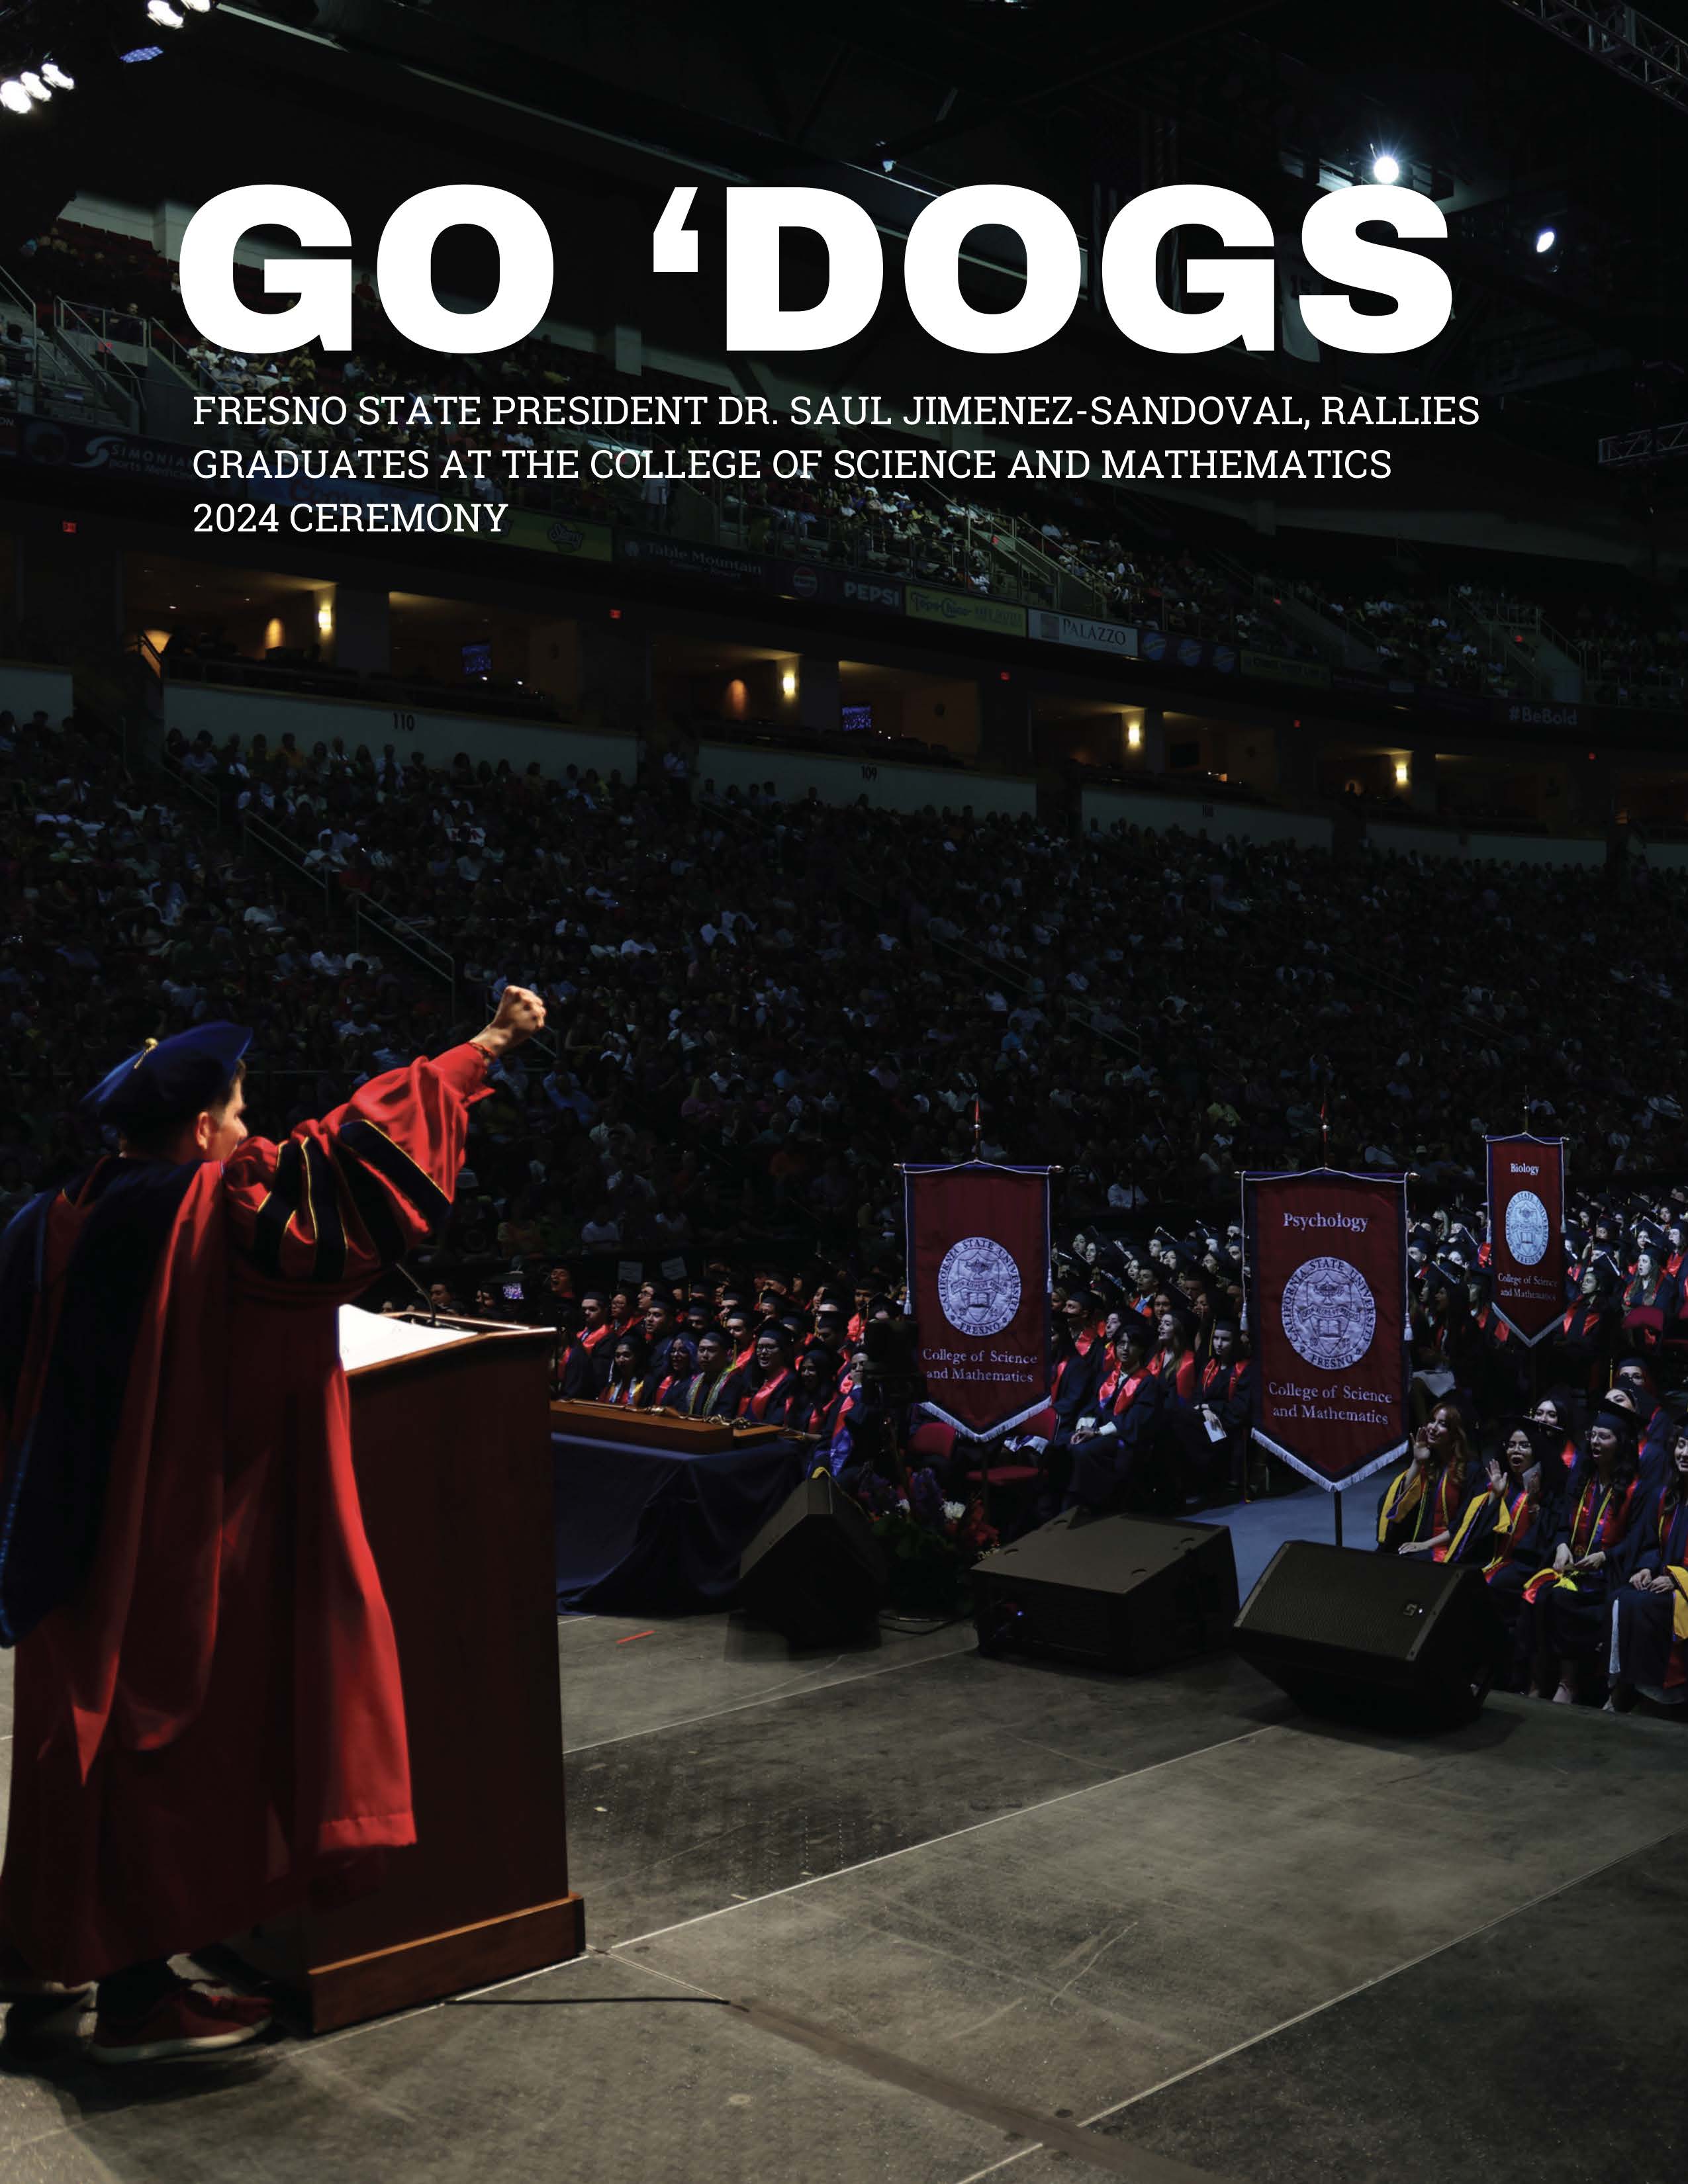 Go dogs, Fresno State president Dr. Saul Jimenez-Sandoval rallies graduates at the college of science and mathematics 2024 ceremony